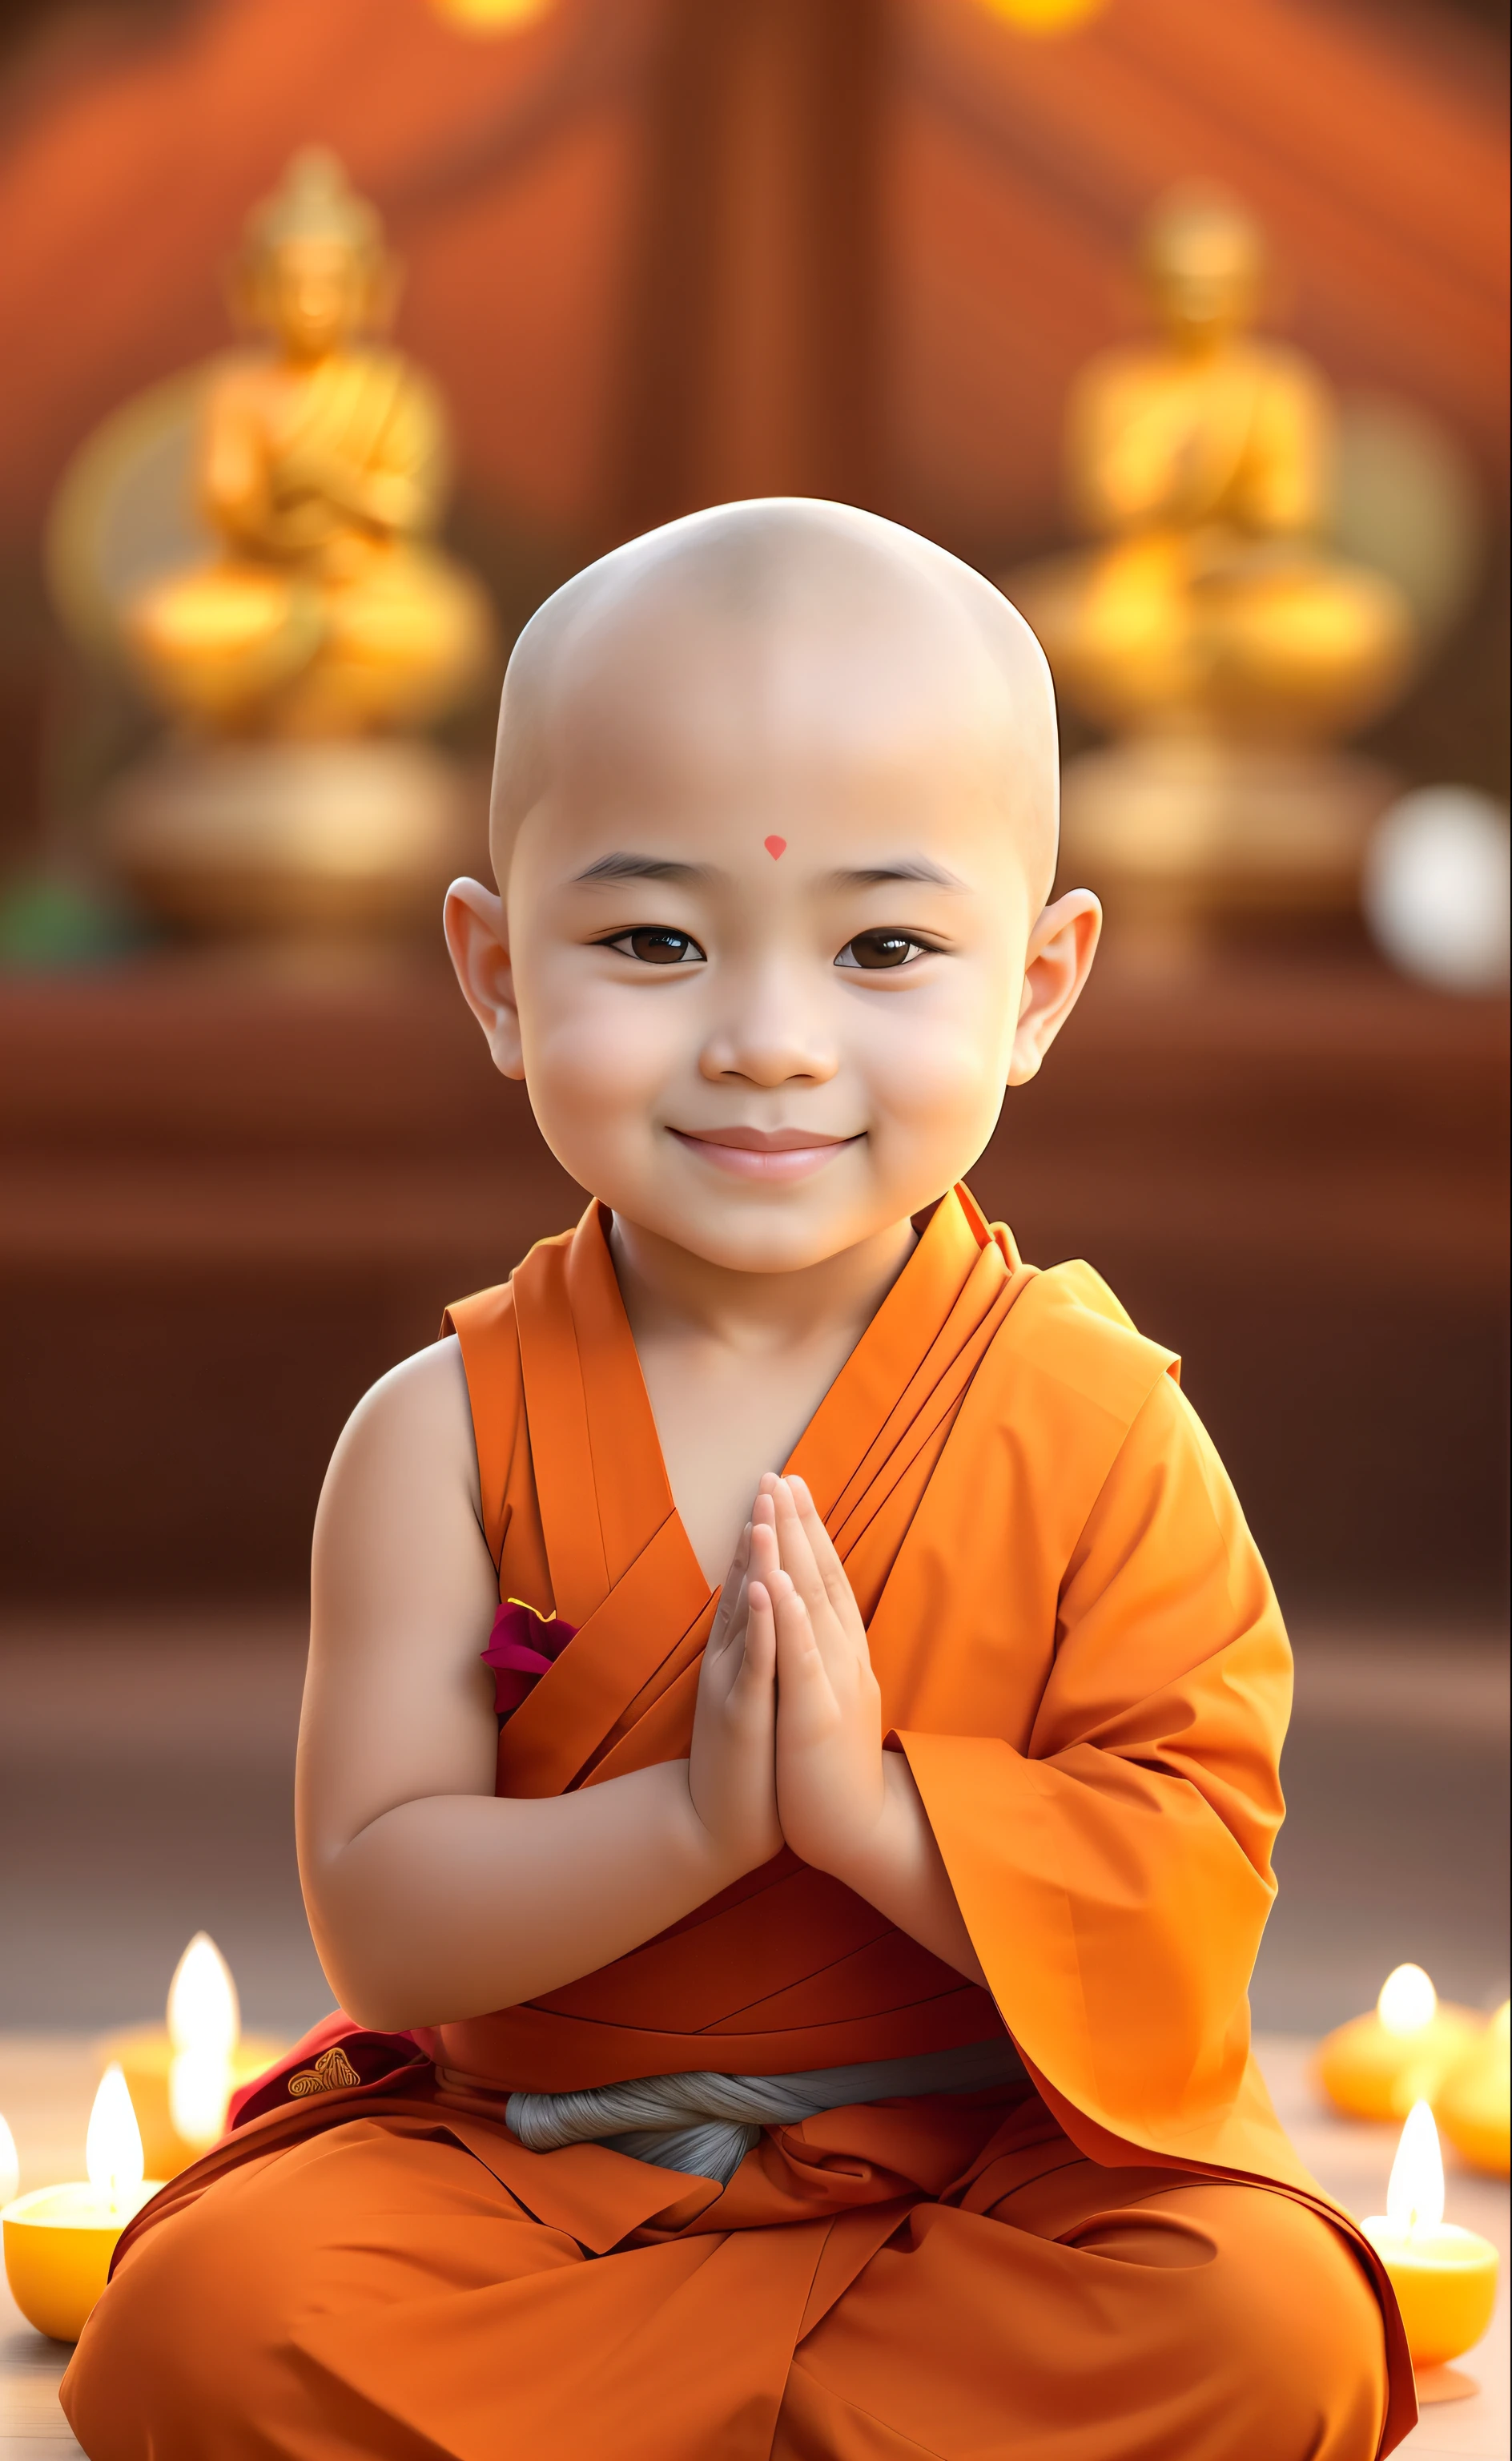 a close up of a  sitting in a meditation position, Buddhist, buddhist monk, Buddhism, monk clothes, a serene smile, monk, monk meditation, screensaver, kiddy big breasts, cute cute, nivanh chanthara, Cute boy, Happy kids, personal profile picture, Serene expression, Innocent smile, beautiful lovely, cute beautiful, peace, lovely digital painting, Thai